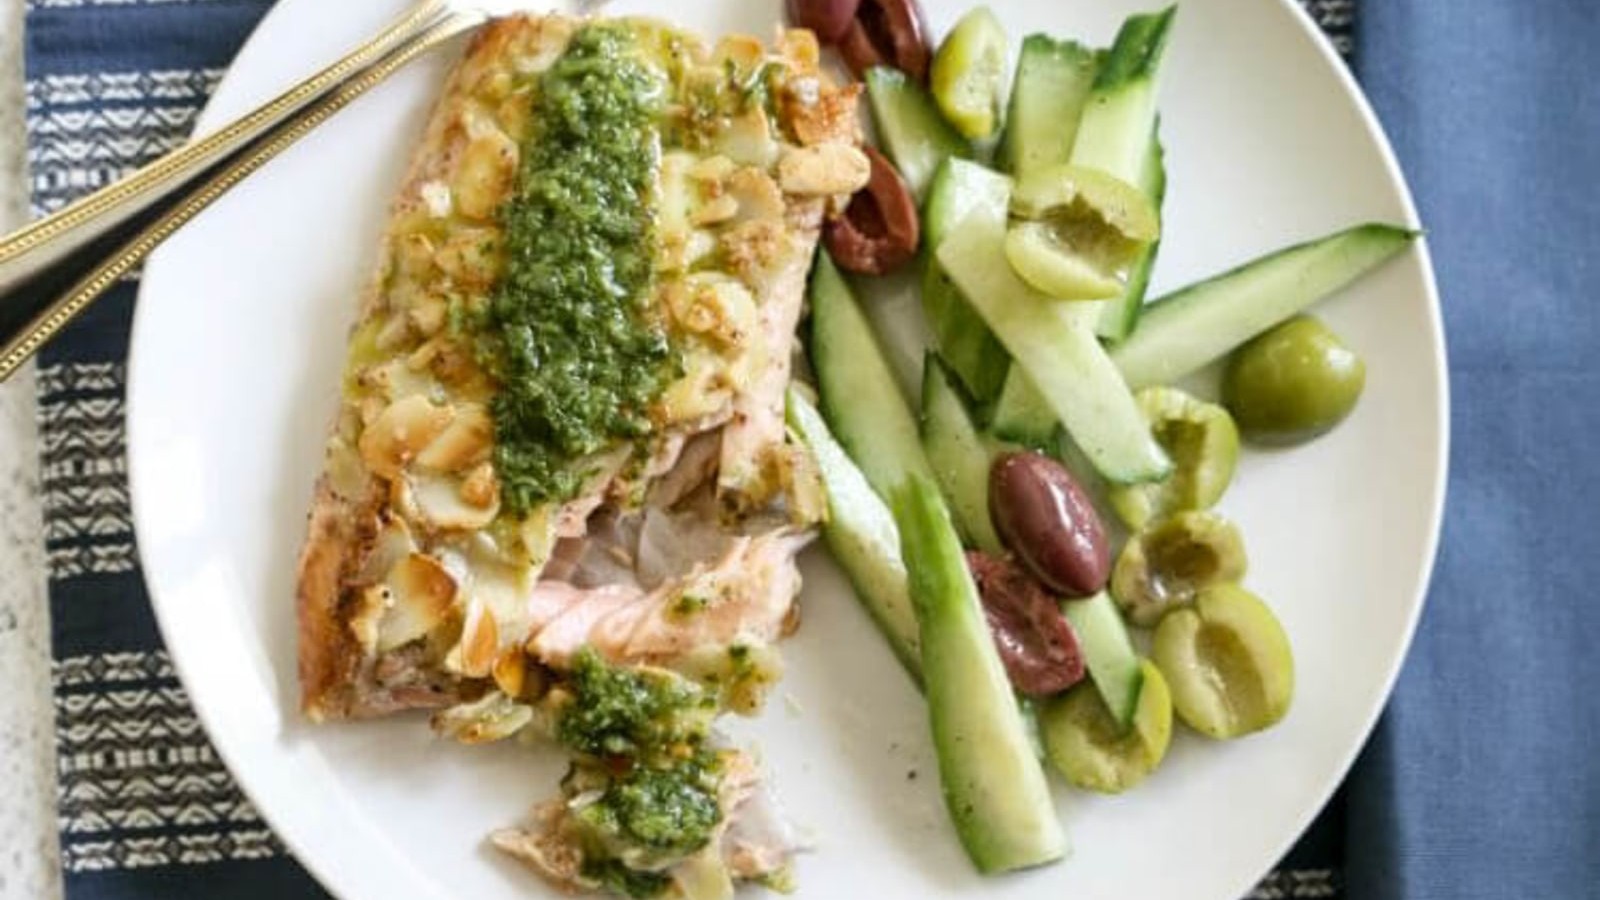 Image of Paleo Almond-Crusted Trout with Chermoula and Cucumber-Olive Salad